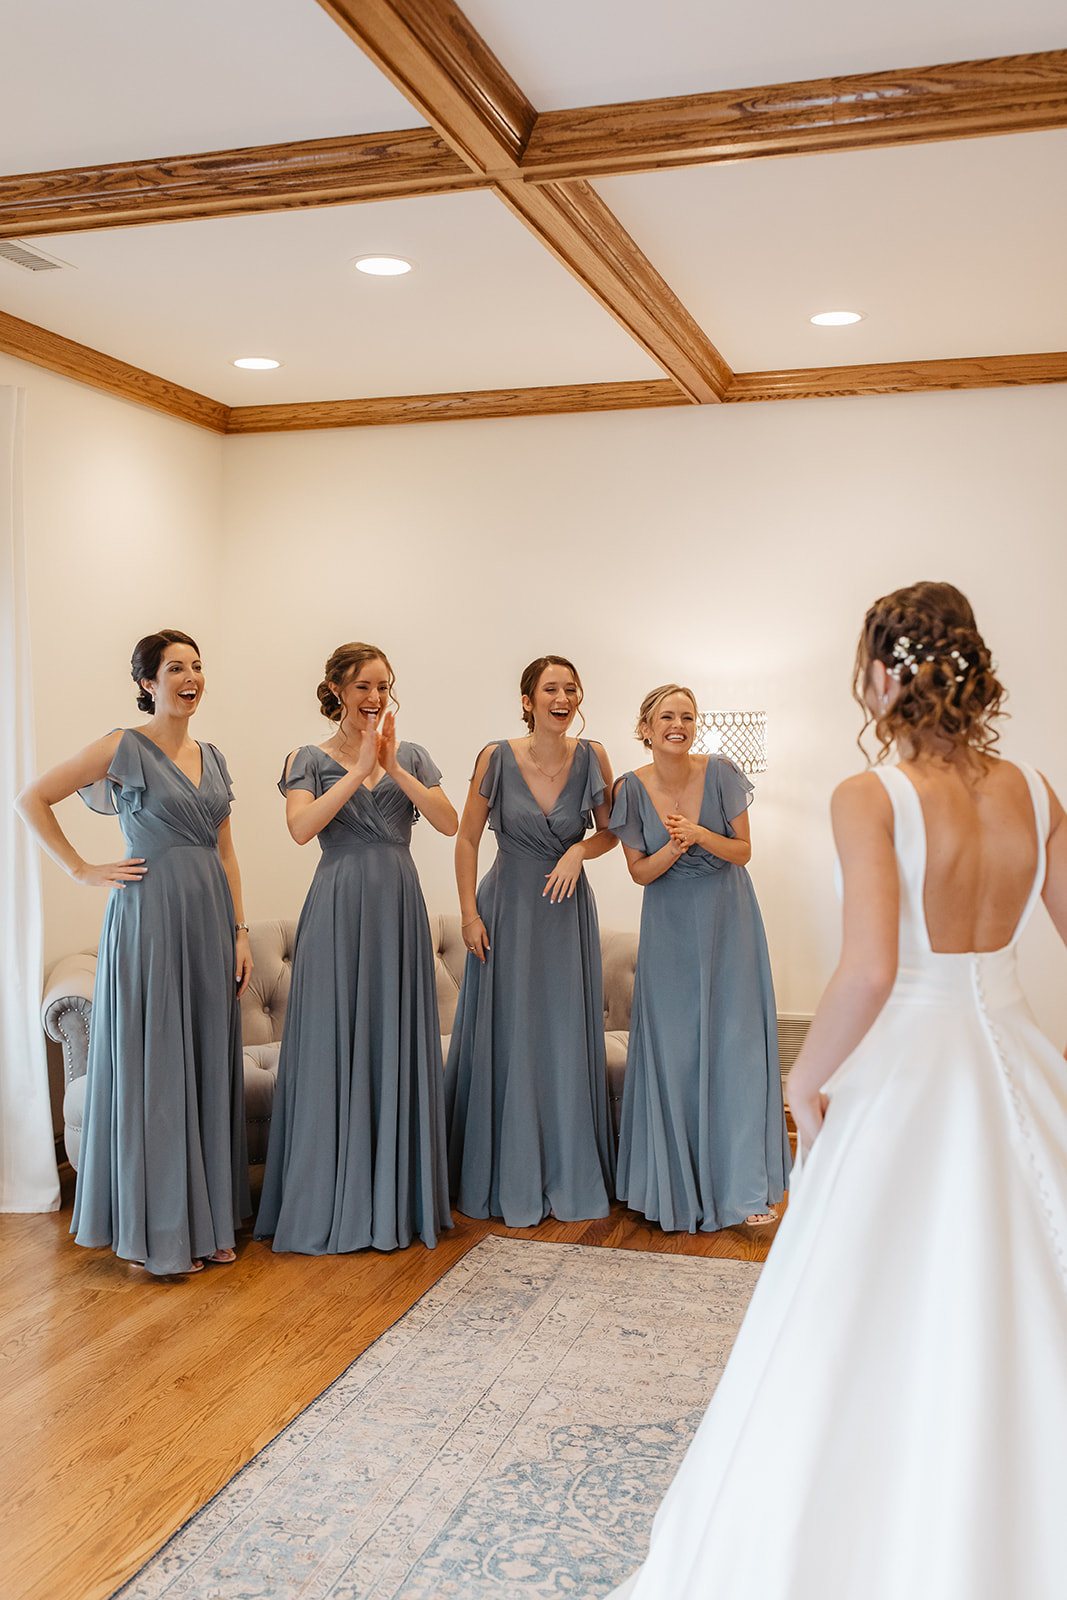 the bride showing her wedding dress to her bridesmaids